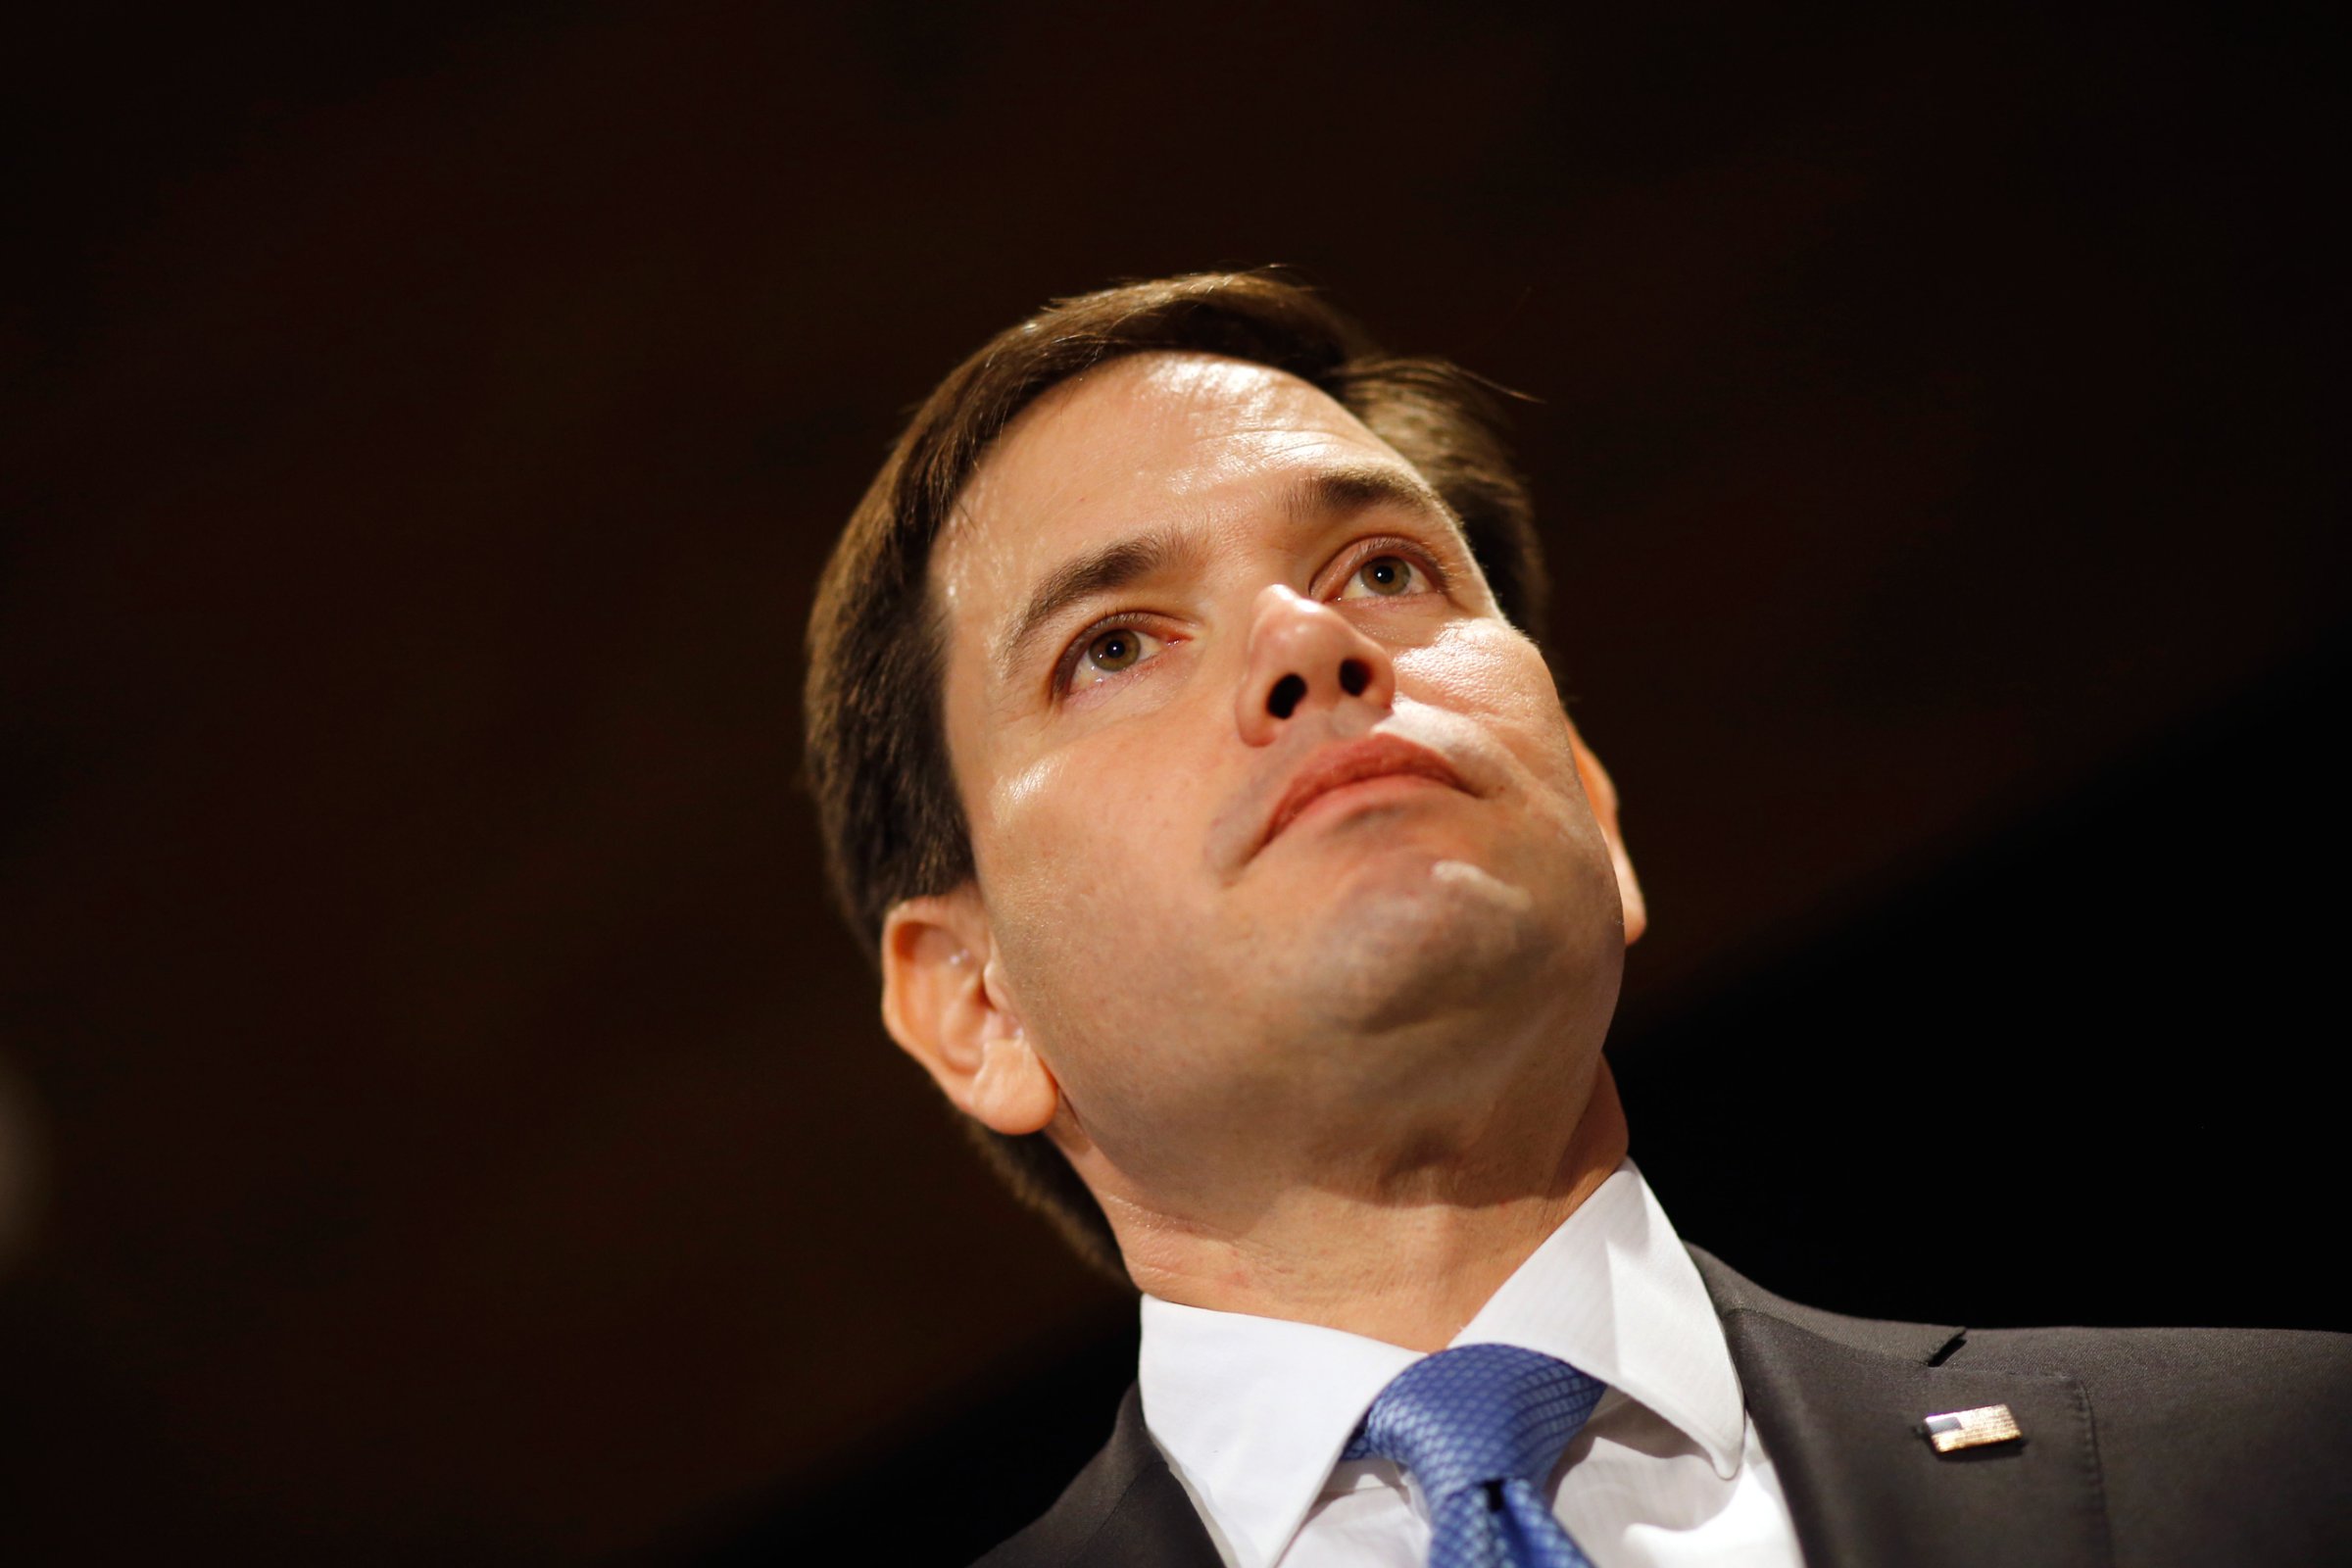 Republican presidential candidate, Sen. Marco Rubio, R-Fla. speaks at a town hall at Fisher Community Center in Marshalltown, Iowa, Wednesday, Jan. 6, 2016. (AP Photo/Patrick Semansky)